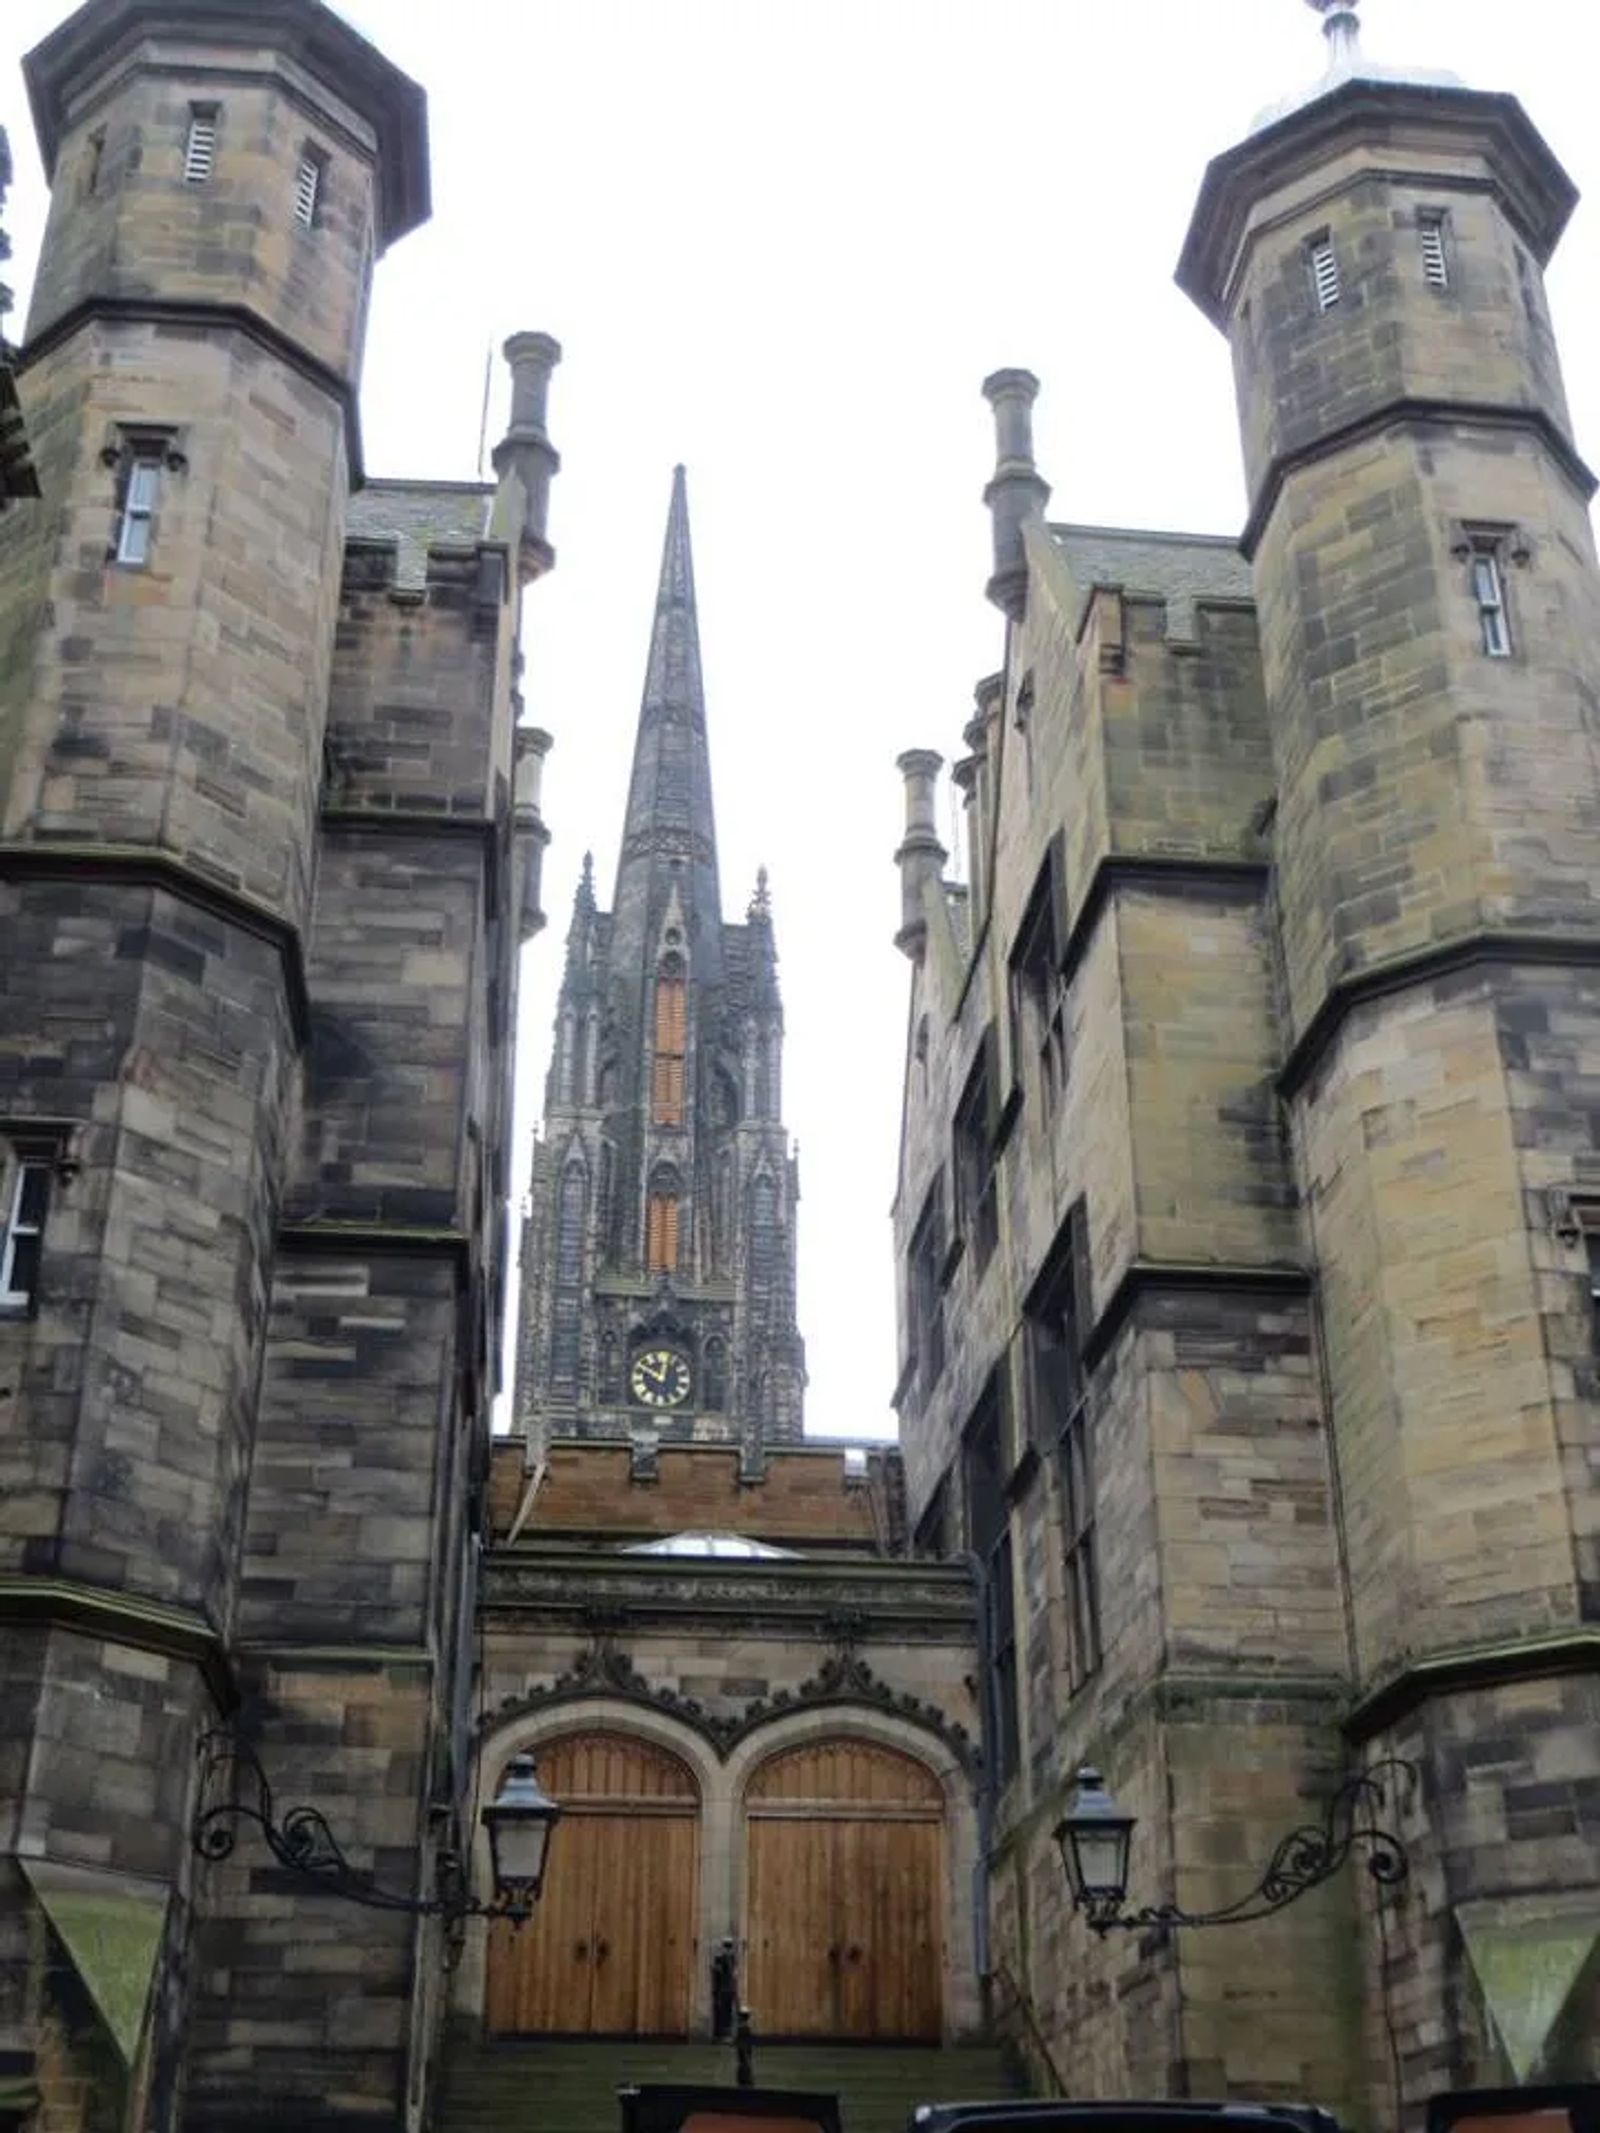 What to see on the royal mile in edinburgh